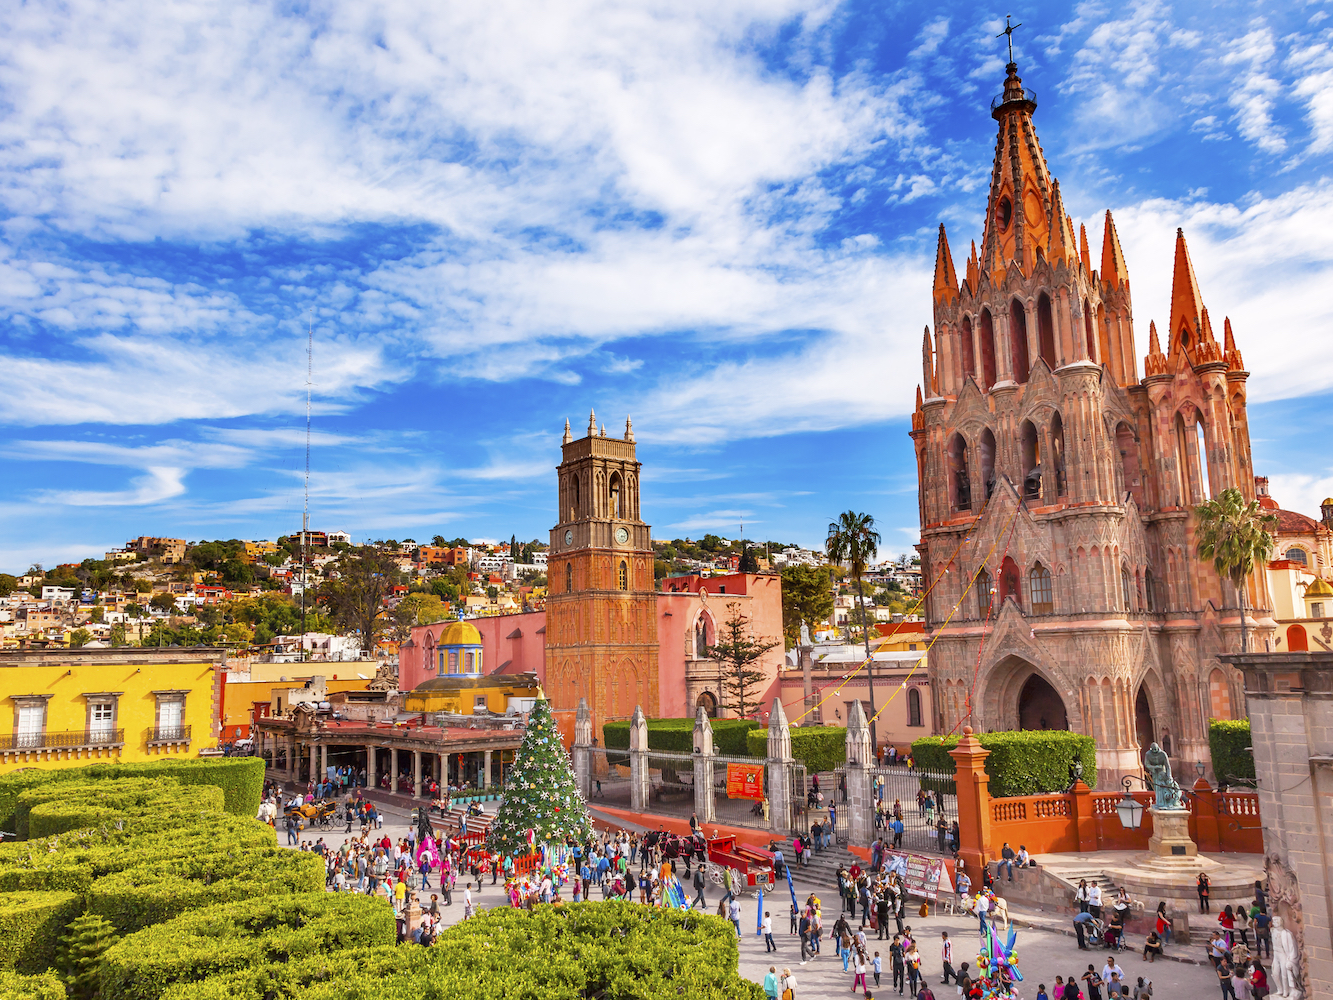 Want to Travel to the Best City in the World? Art Routes San Miguel de Allende is the One!